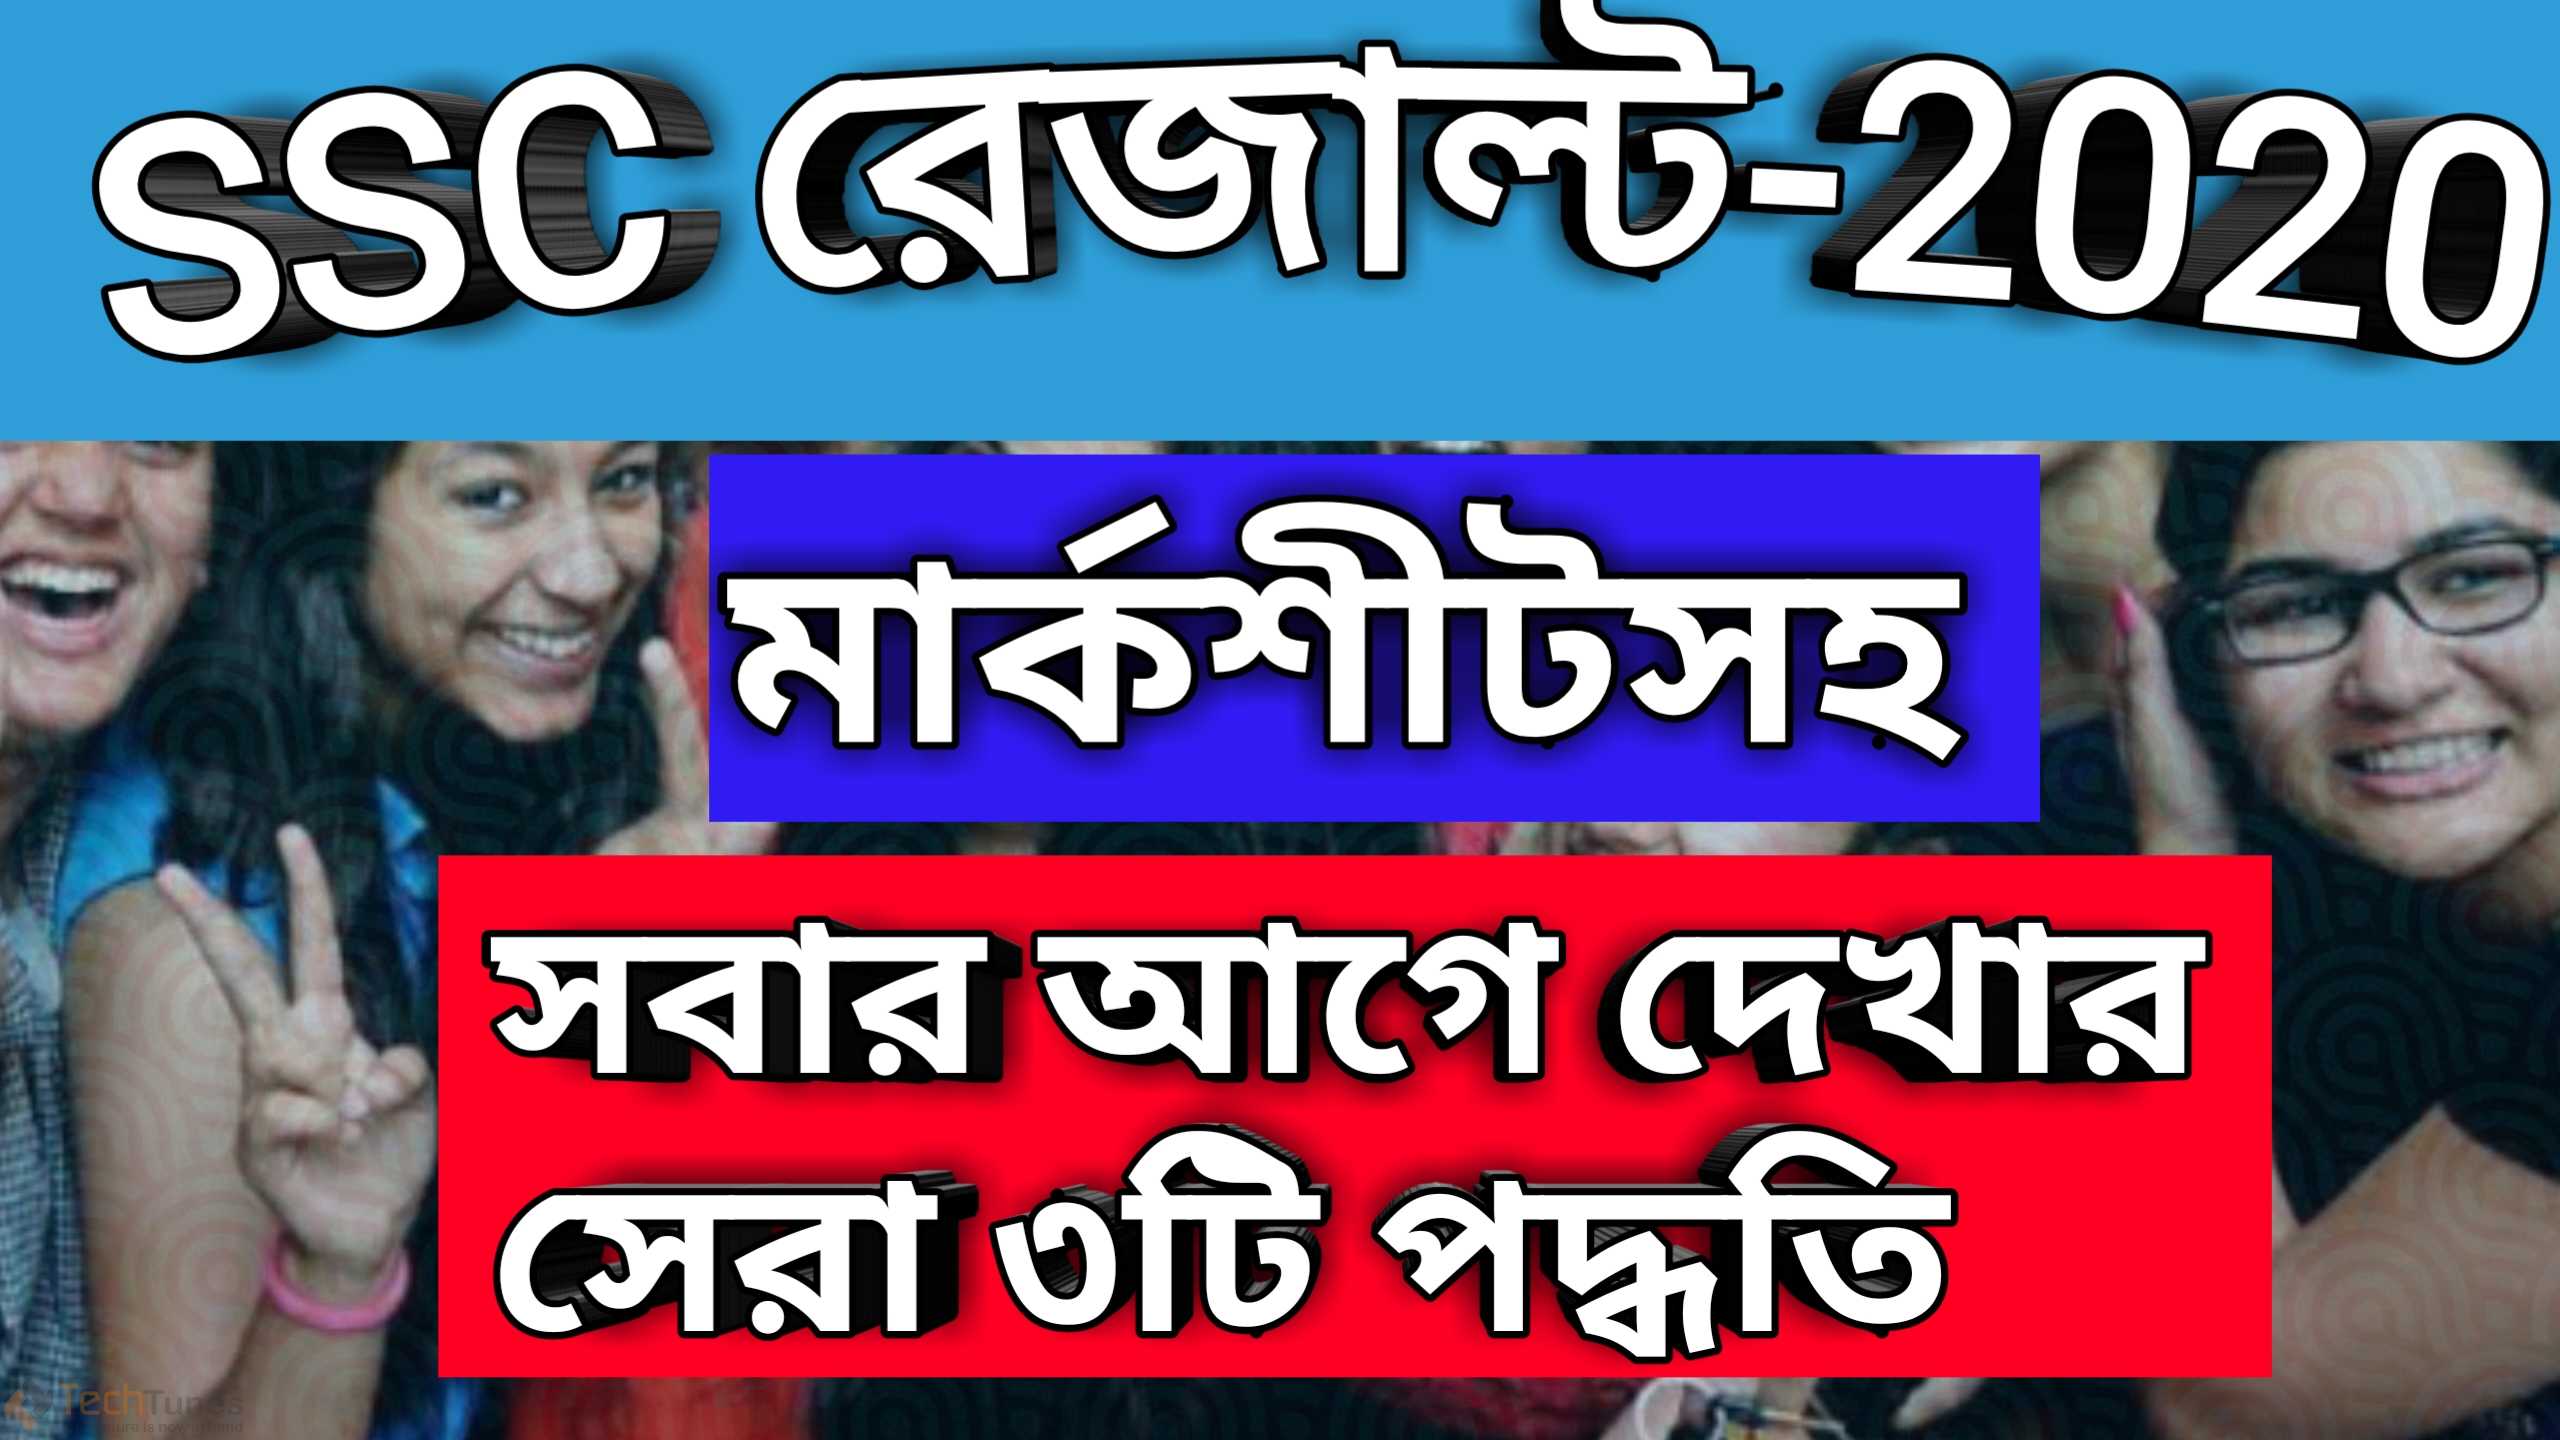 how to check SSC result 2020.